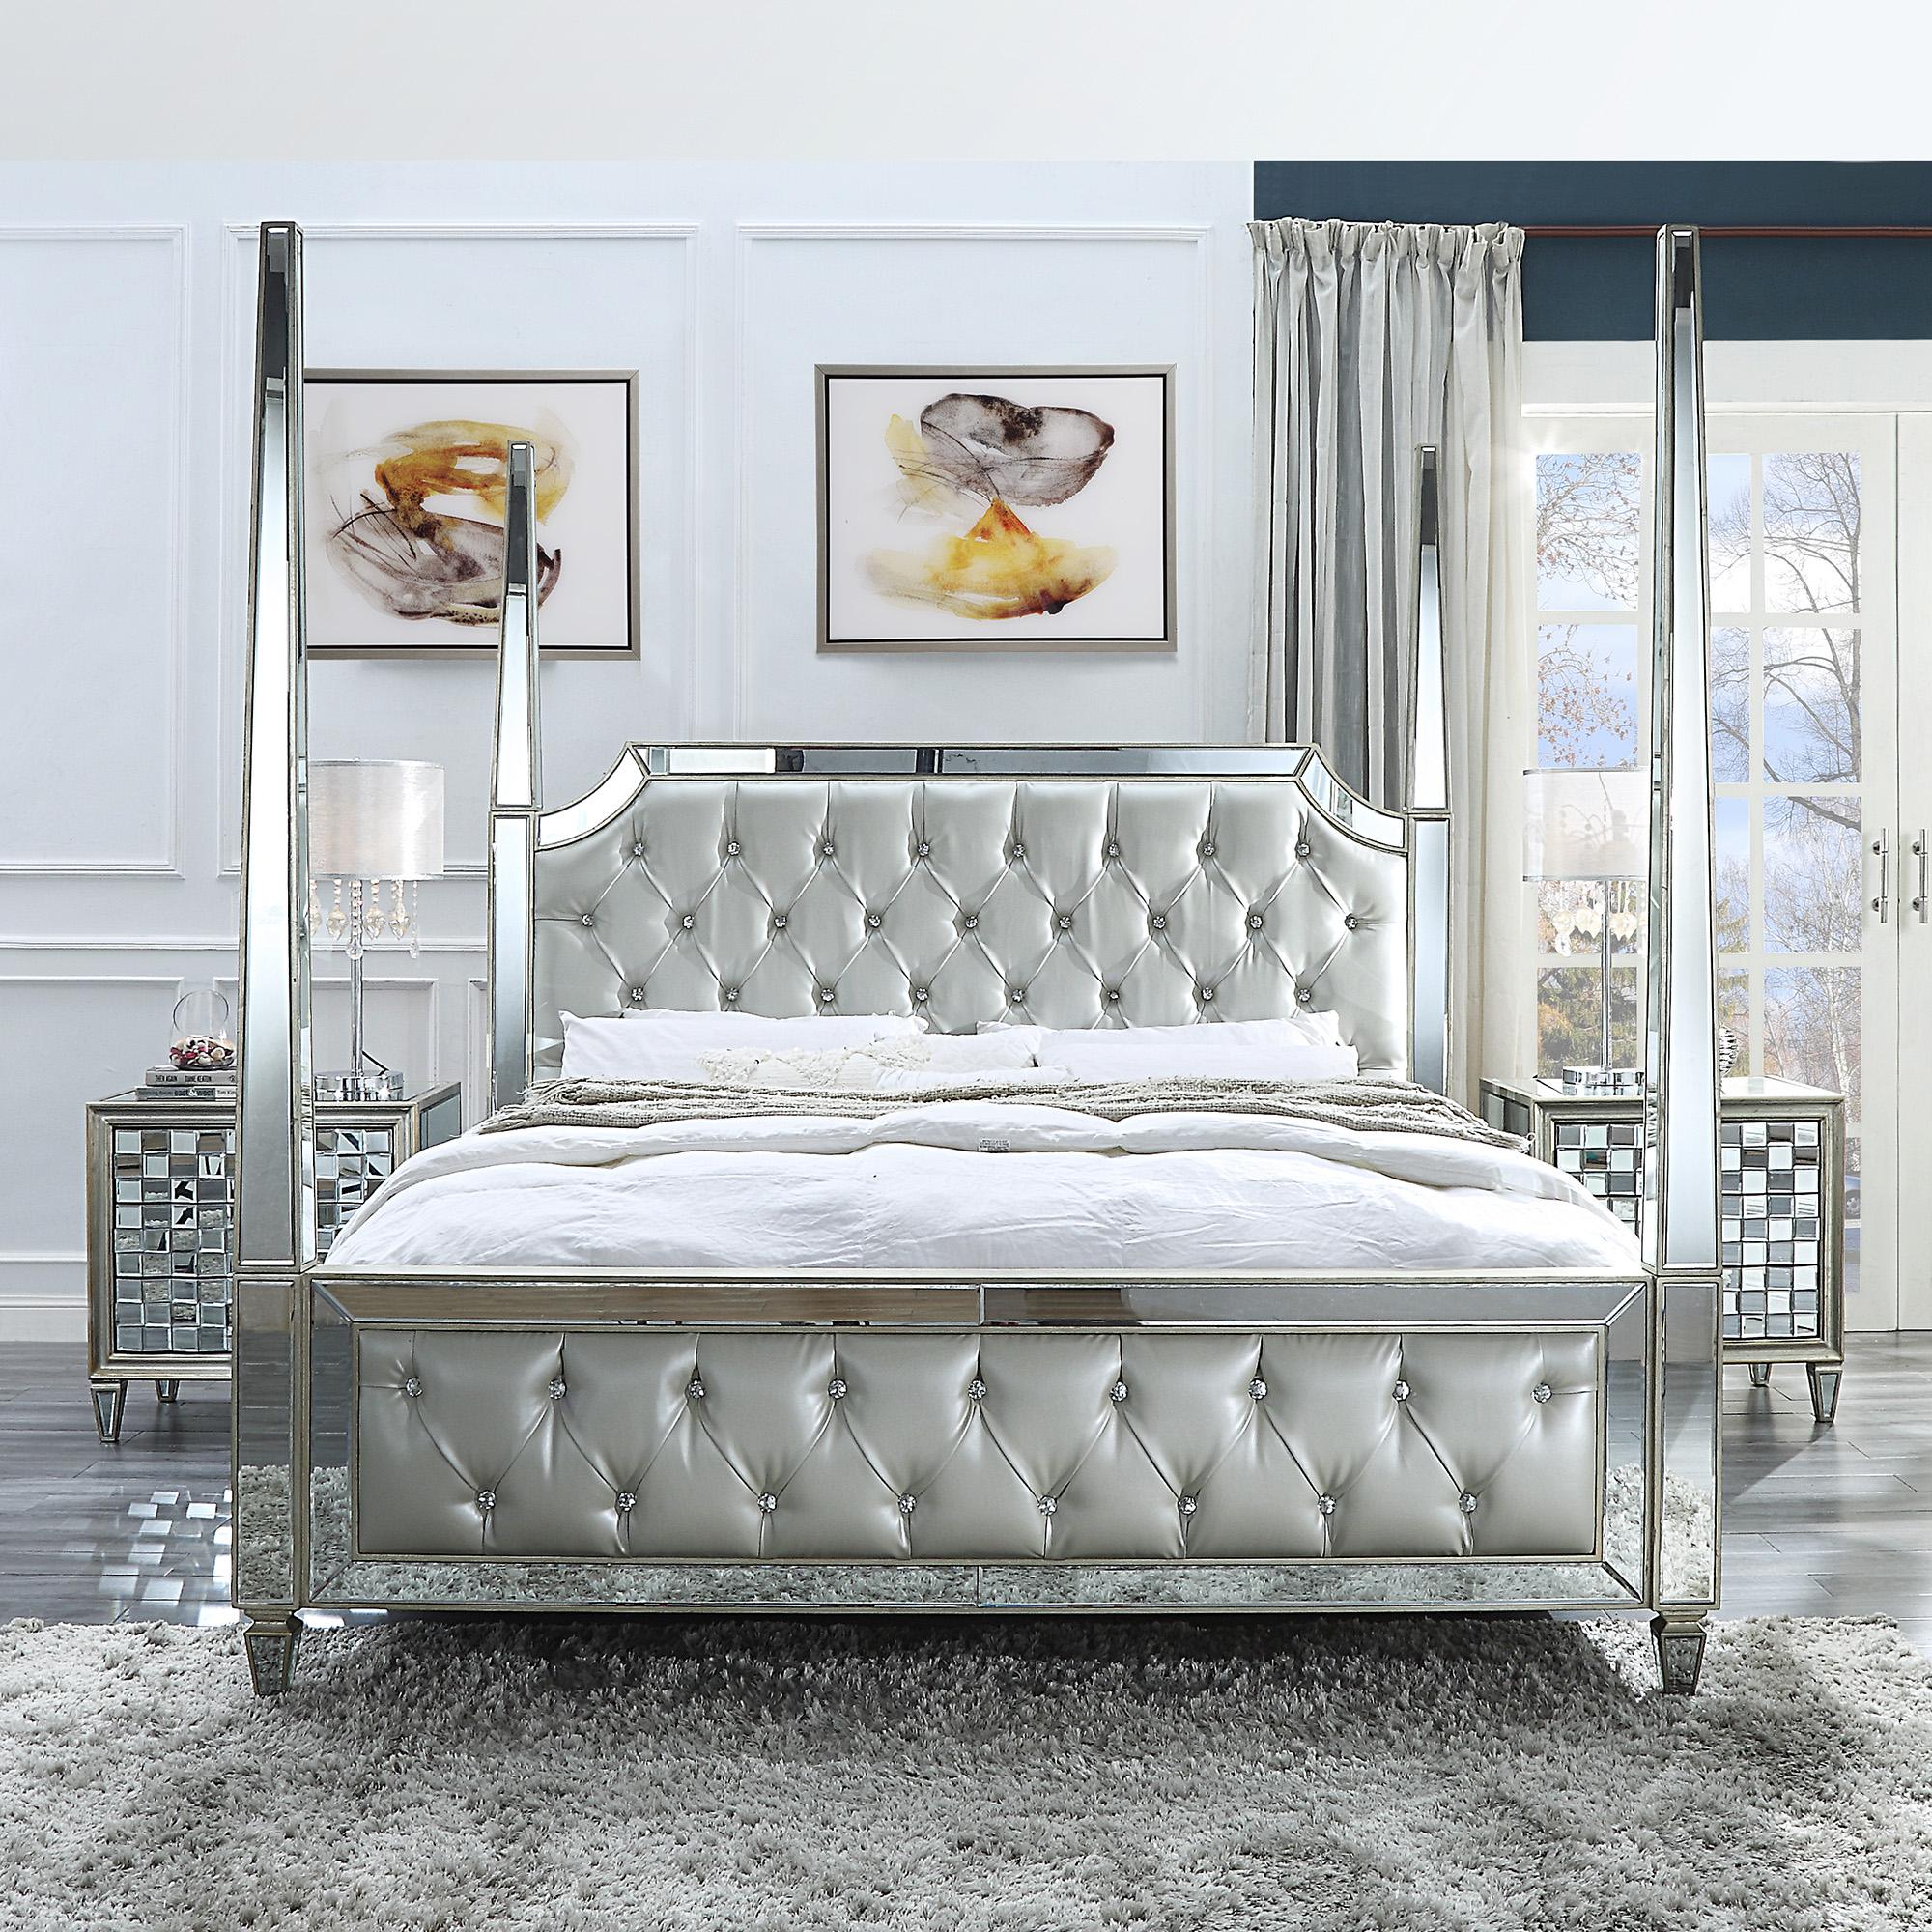 

    
Silver & Mirror CAL King Canopy Bed Modern Homey Design HD-6001
